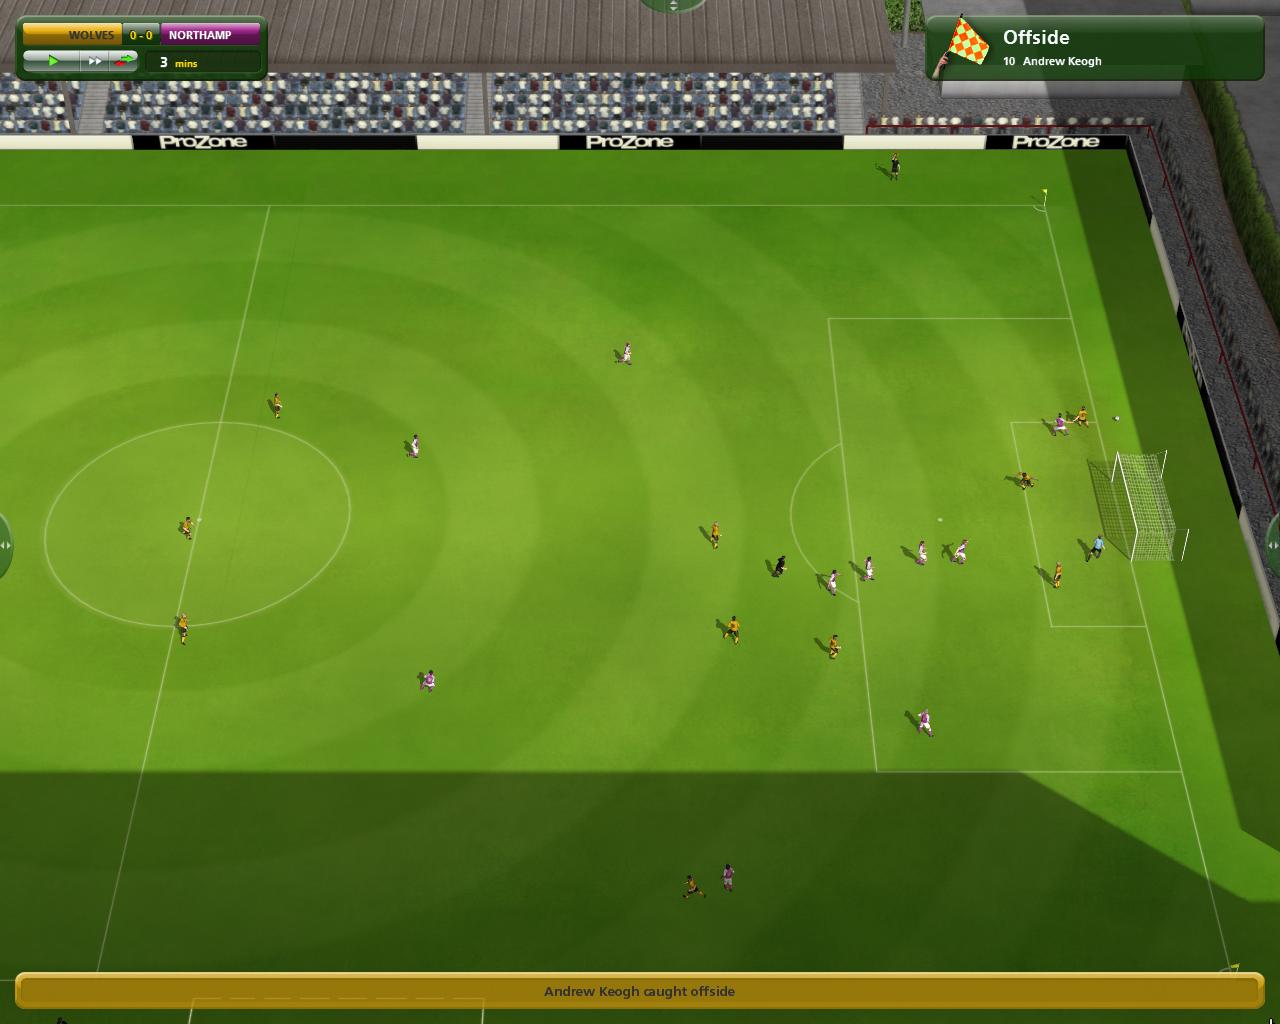 Championship Manager 2010 out now on iPhone